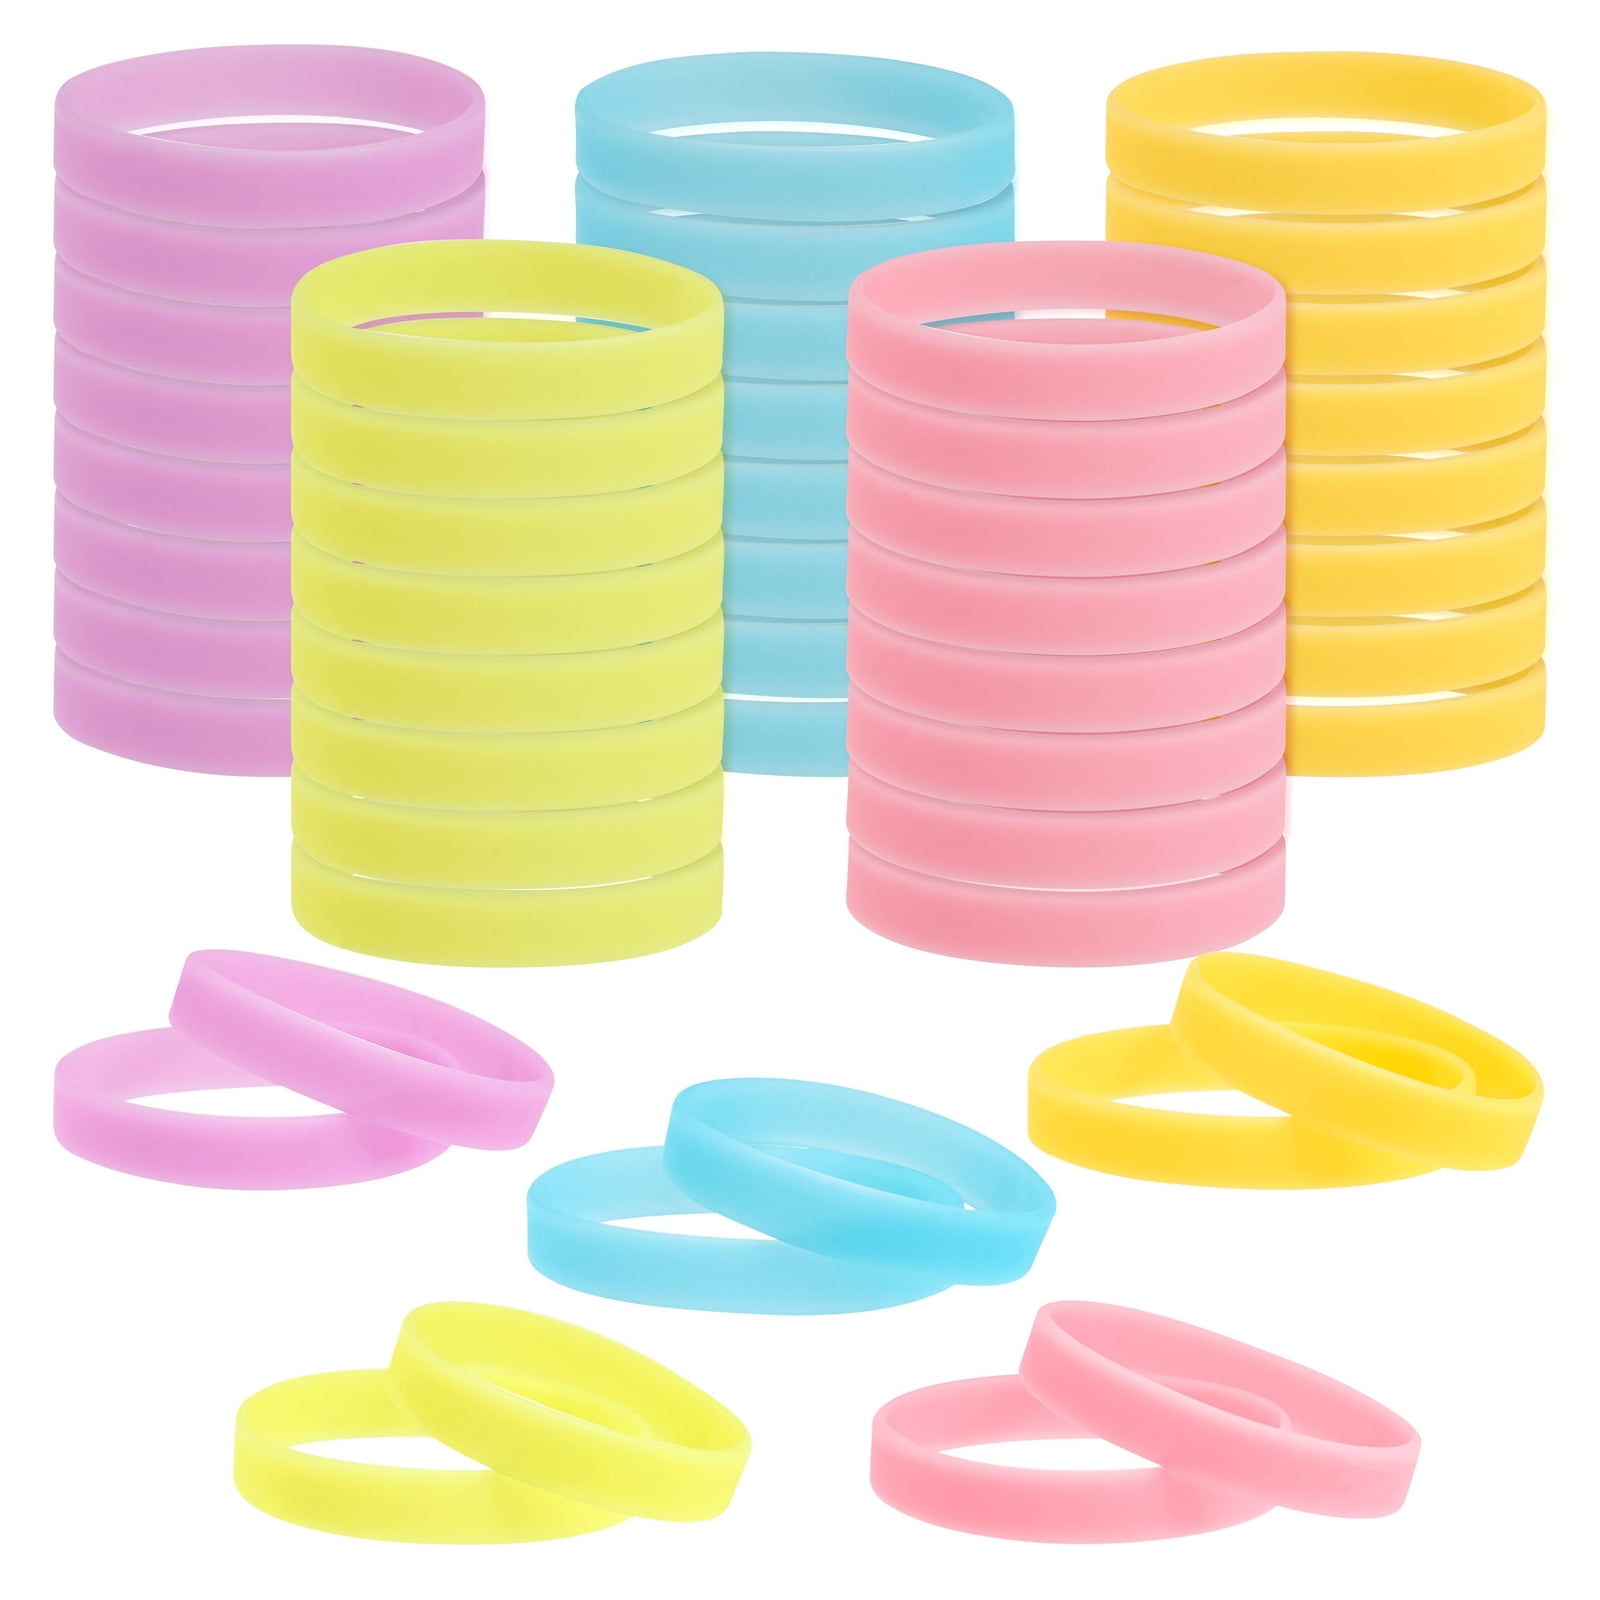 8 Pack Color Changing Cute Bracelets - Silicone Beaded Bracelets Jewelry  Set for Kids, Teen Girls, Women (2.6x0.3 in) 